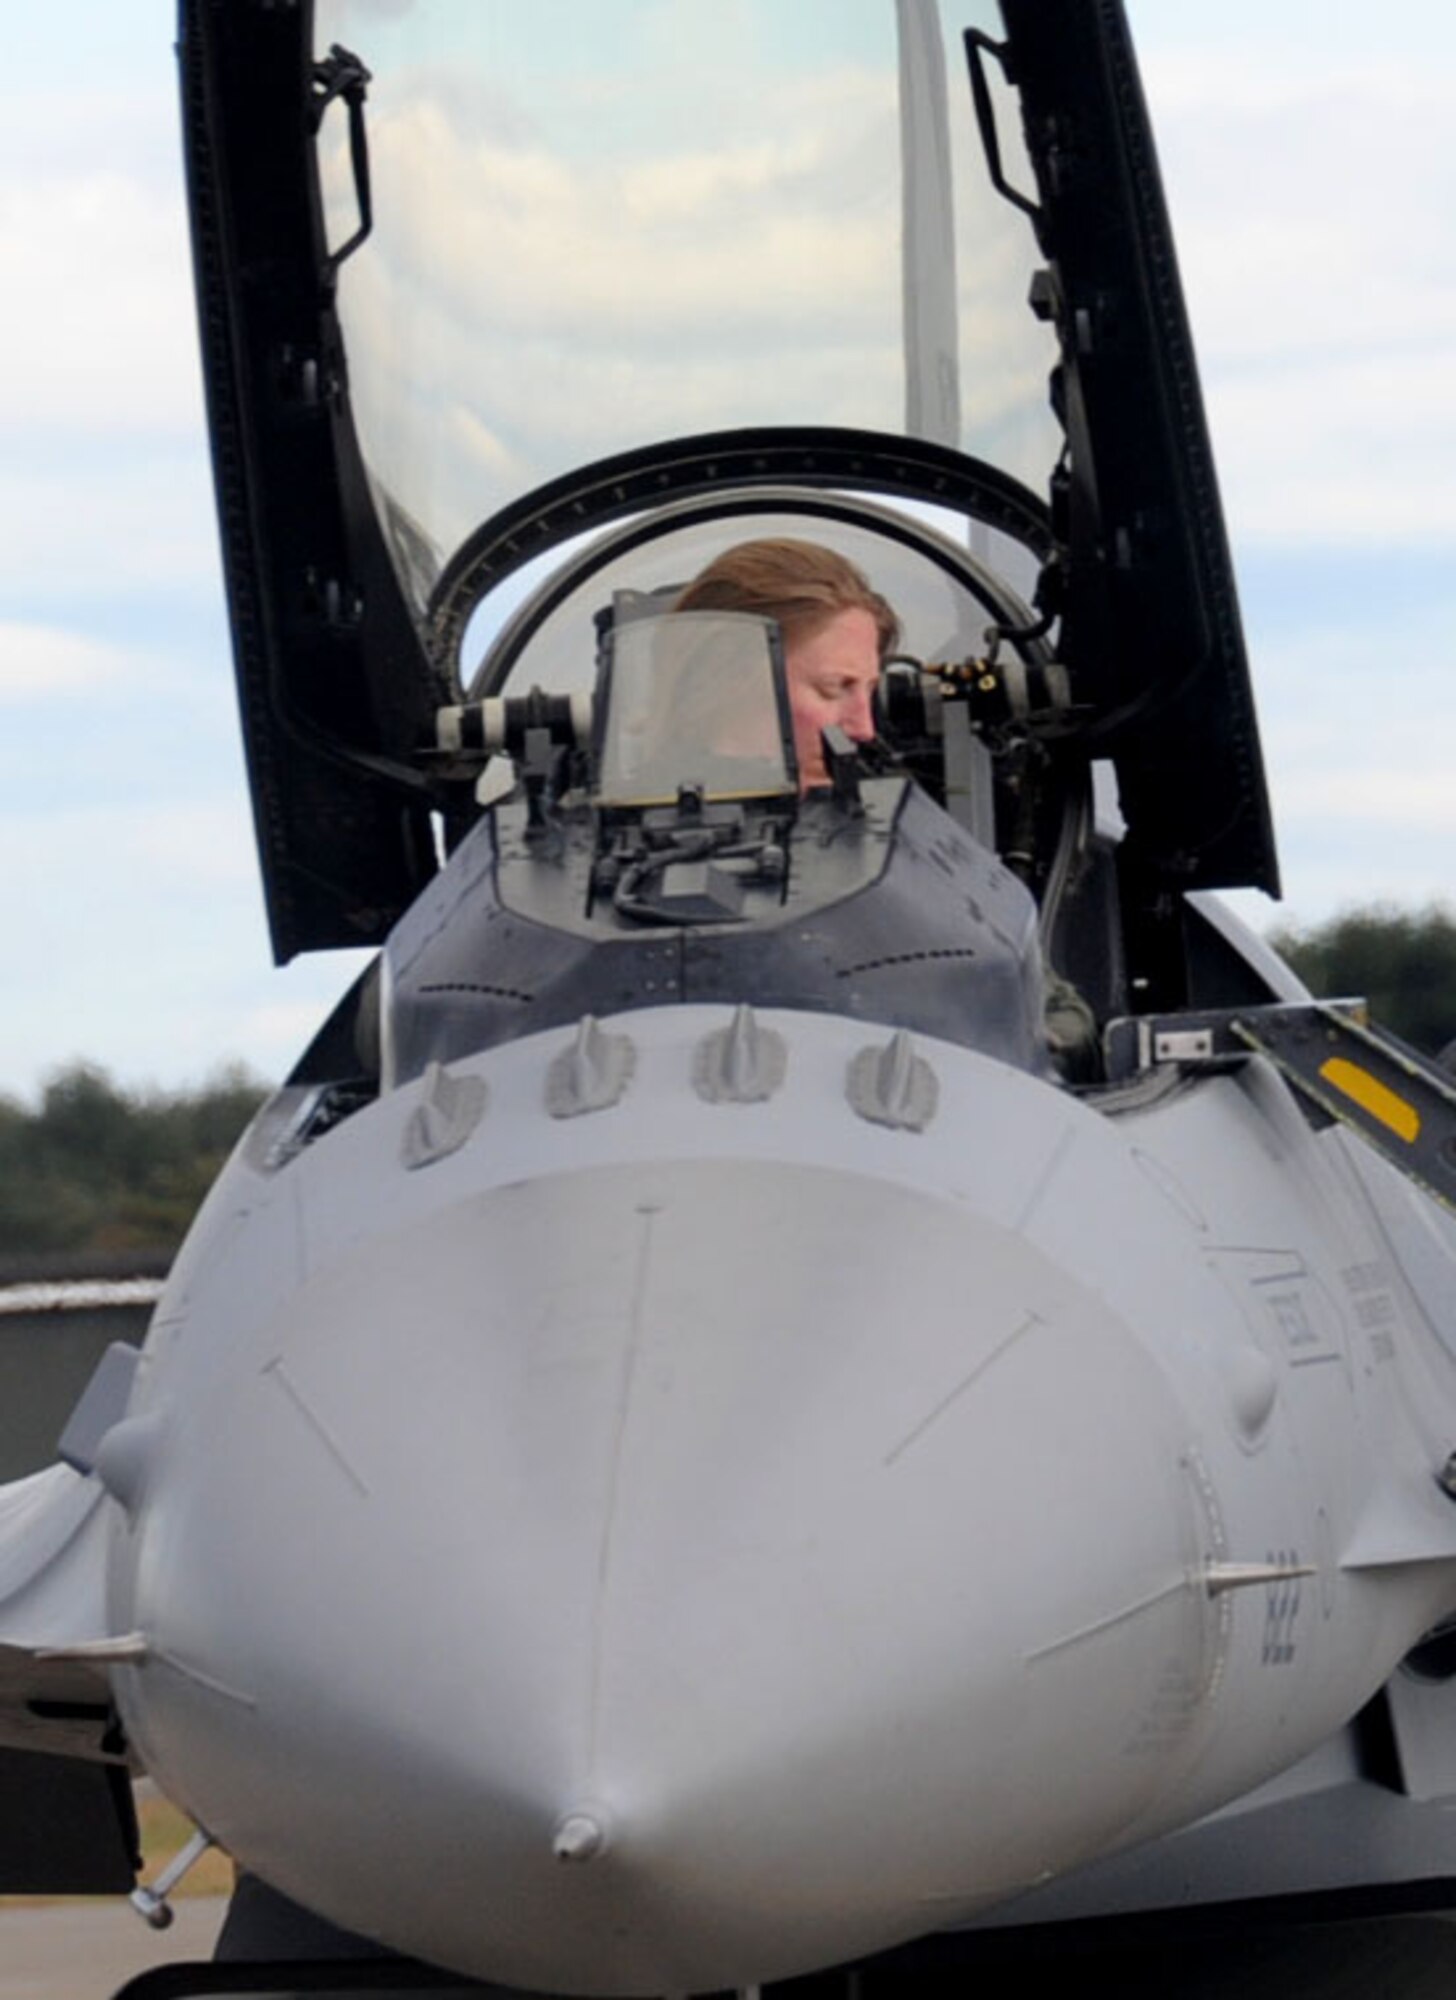 U.S. Air Force Maj. Kathryn Gaetke, 14th Fighter Squadron pilot, prepares to exit her F-16 Fighting Falcon aircraft after completing a mission during Keen Sword 2013 at Misawa Air Base, Japan, Nov. 8, 2012. Gaetke was one of the first pilots to land after completing a simulated mission objective for the exercise. (U.S. Air Force photo by Airman 1st Class Kenna Jackson)